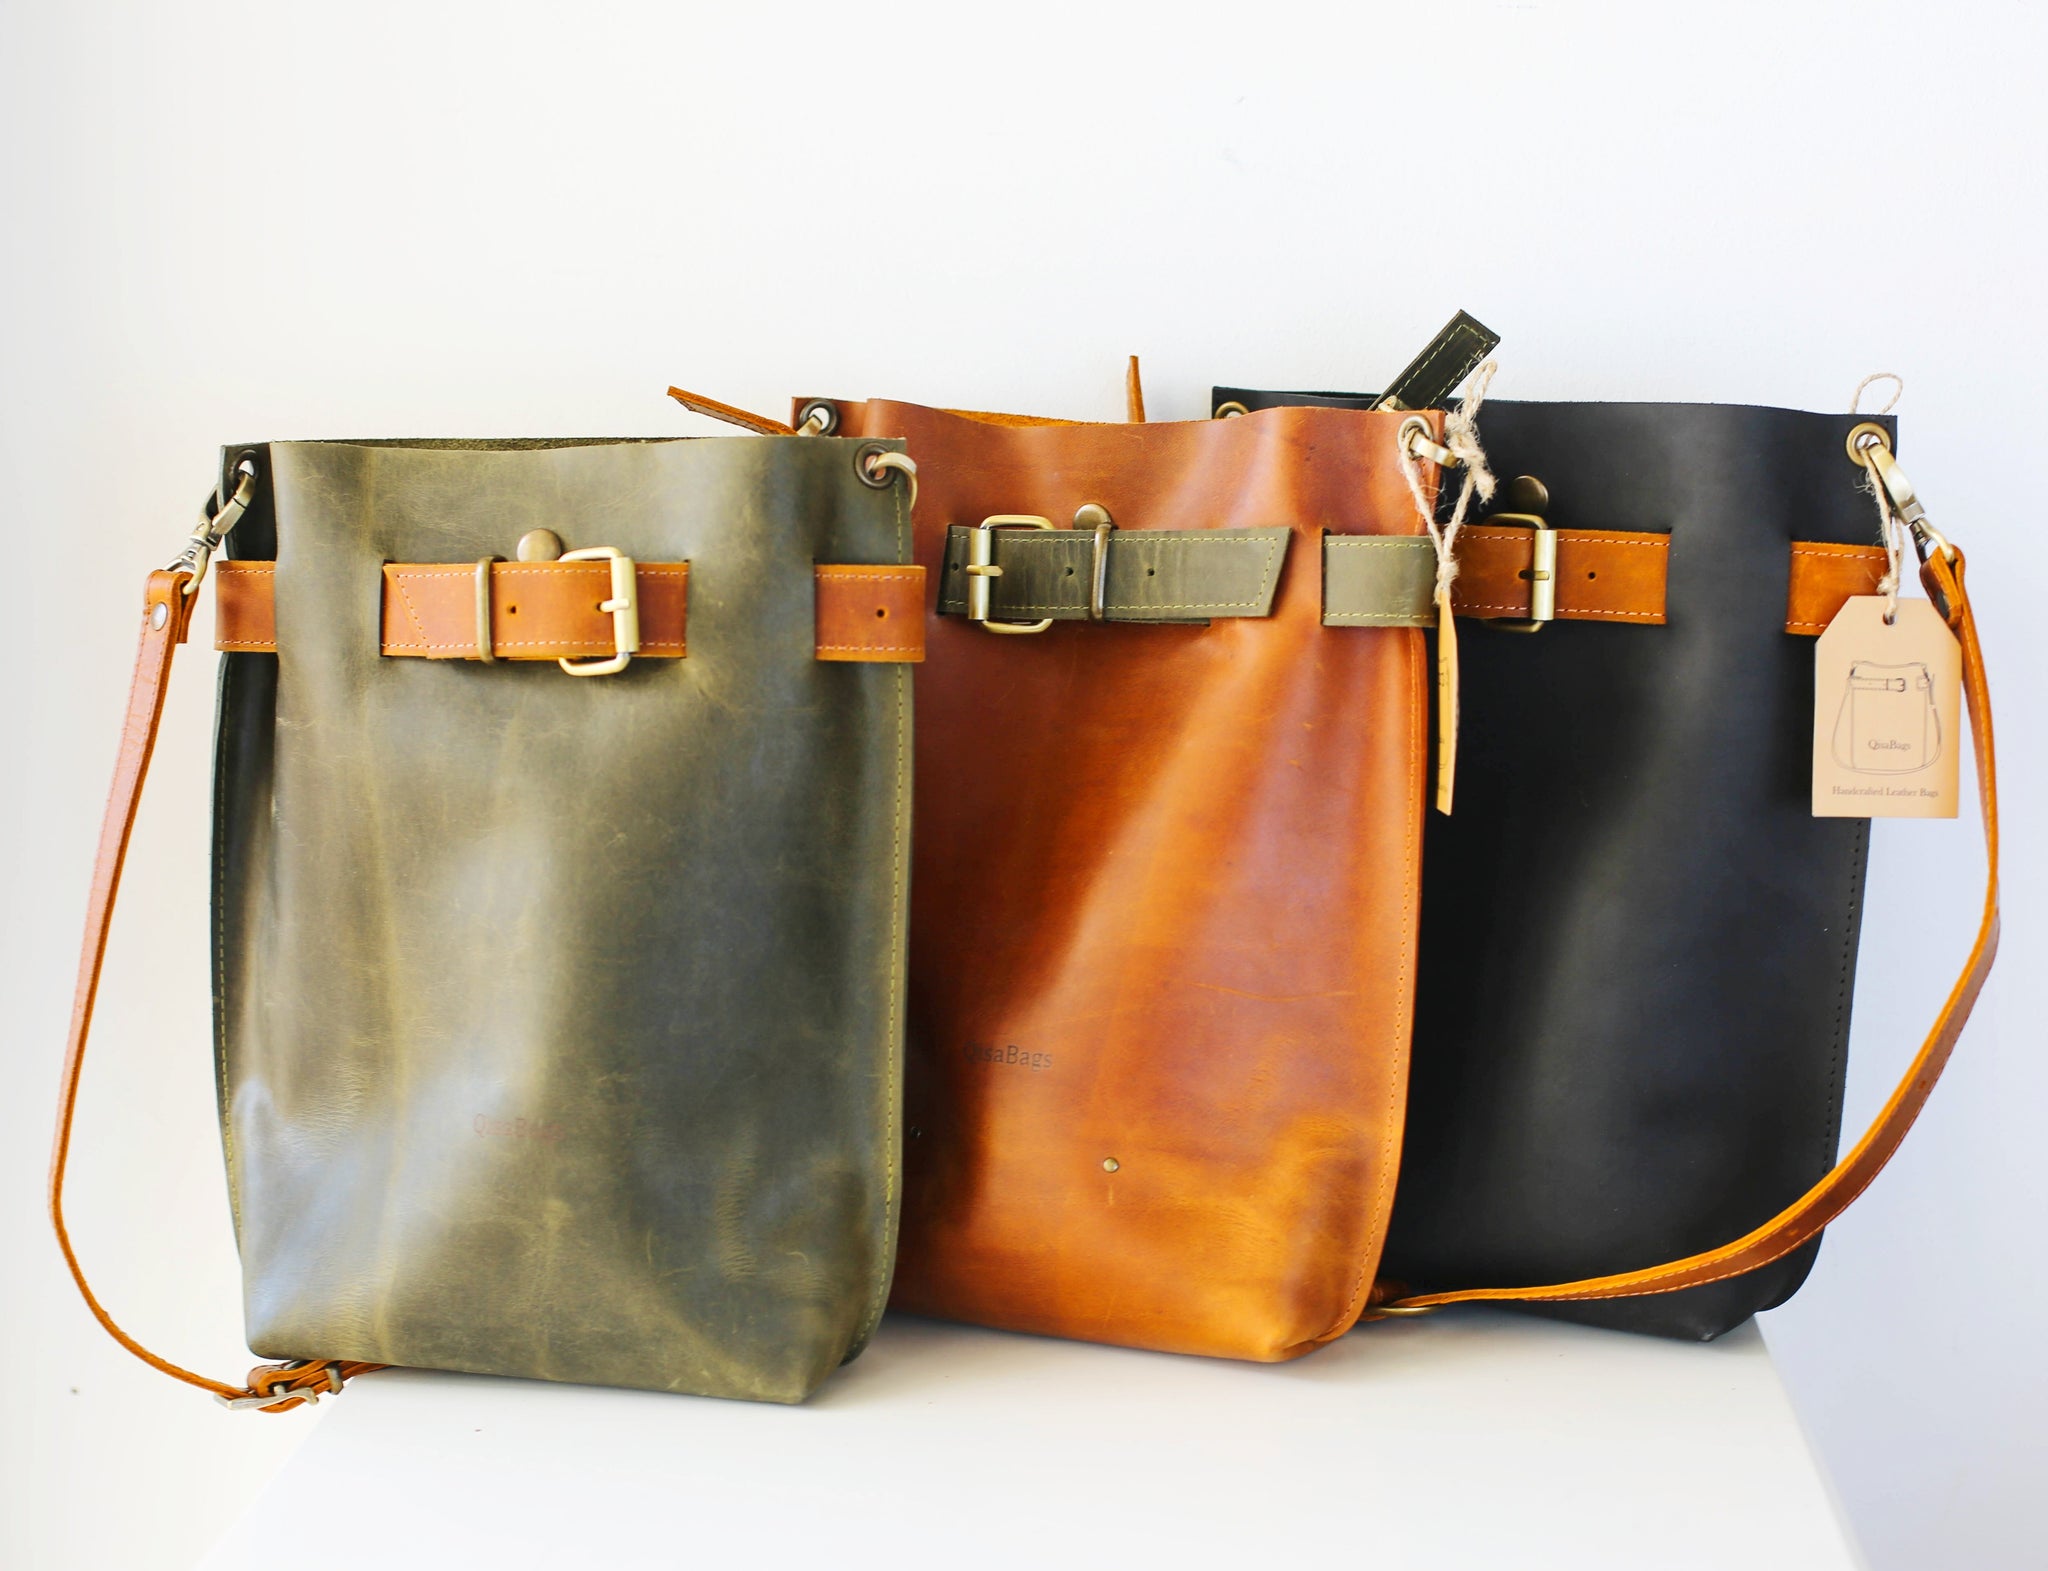 Leather Tote, Full Grain Quality Purse